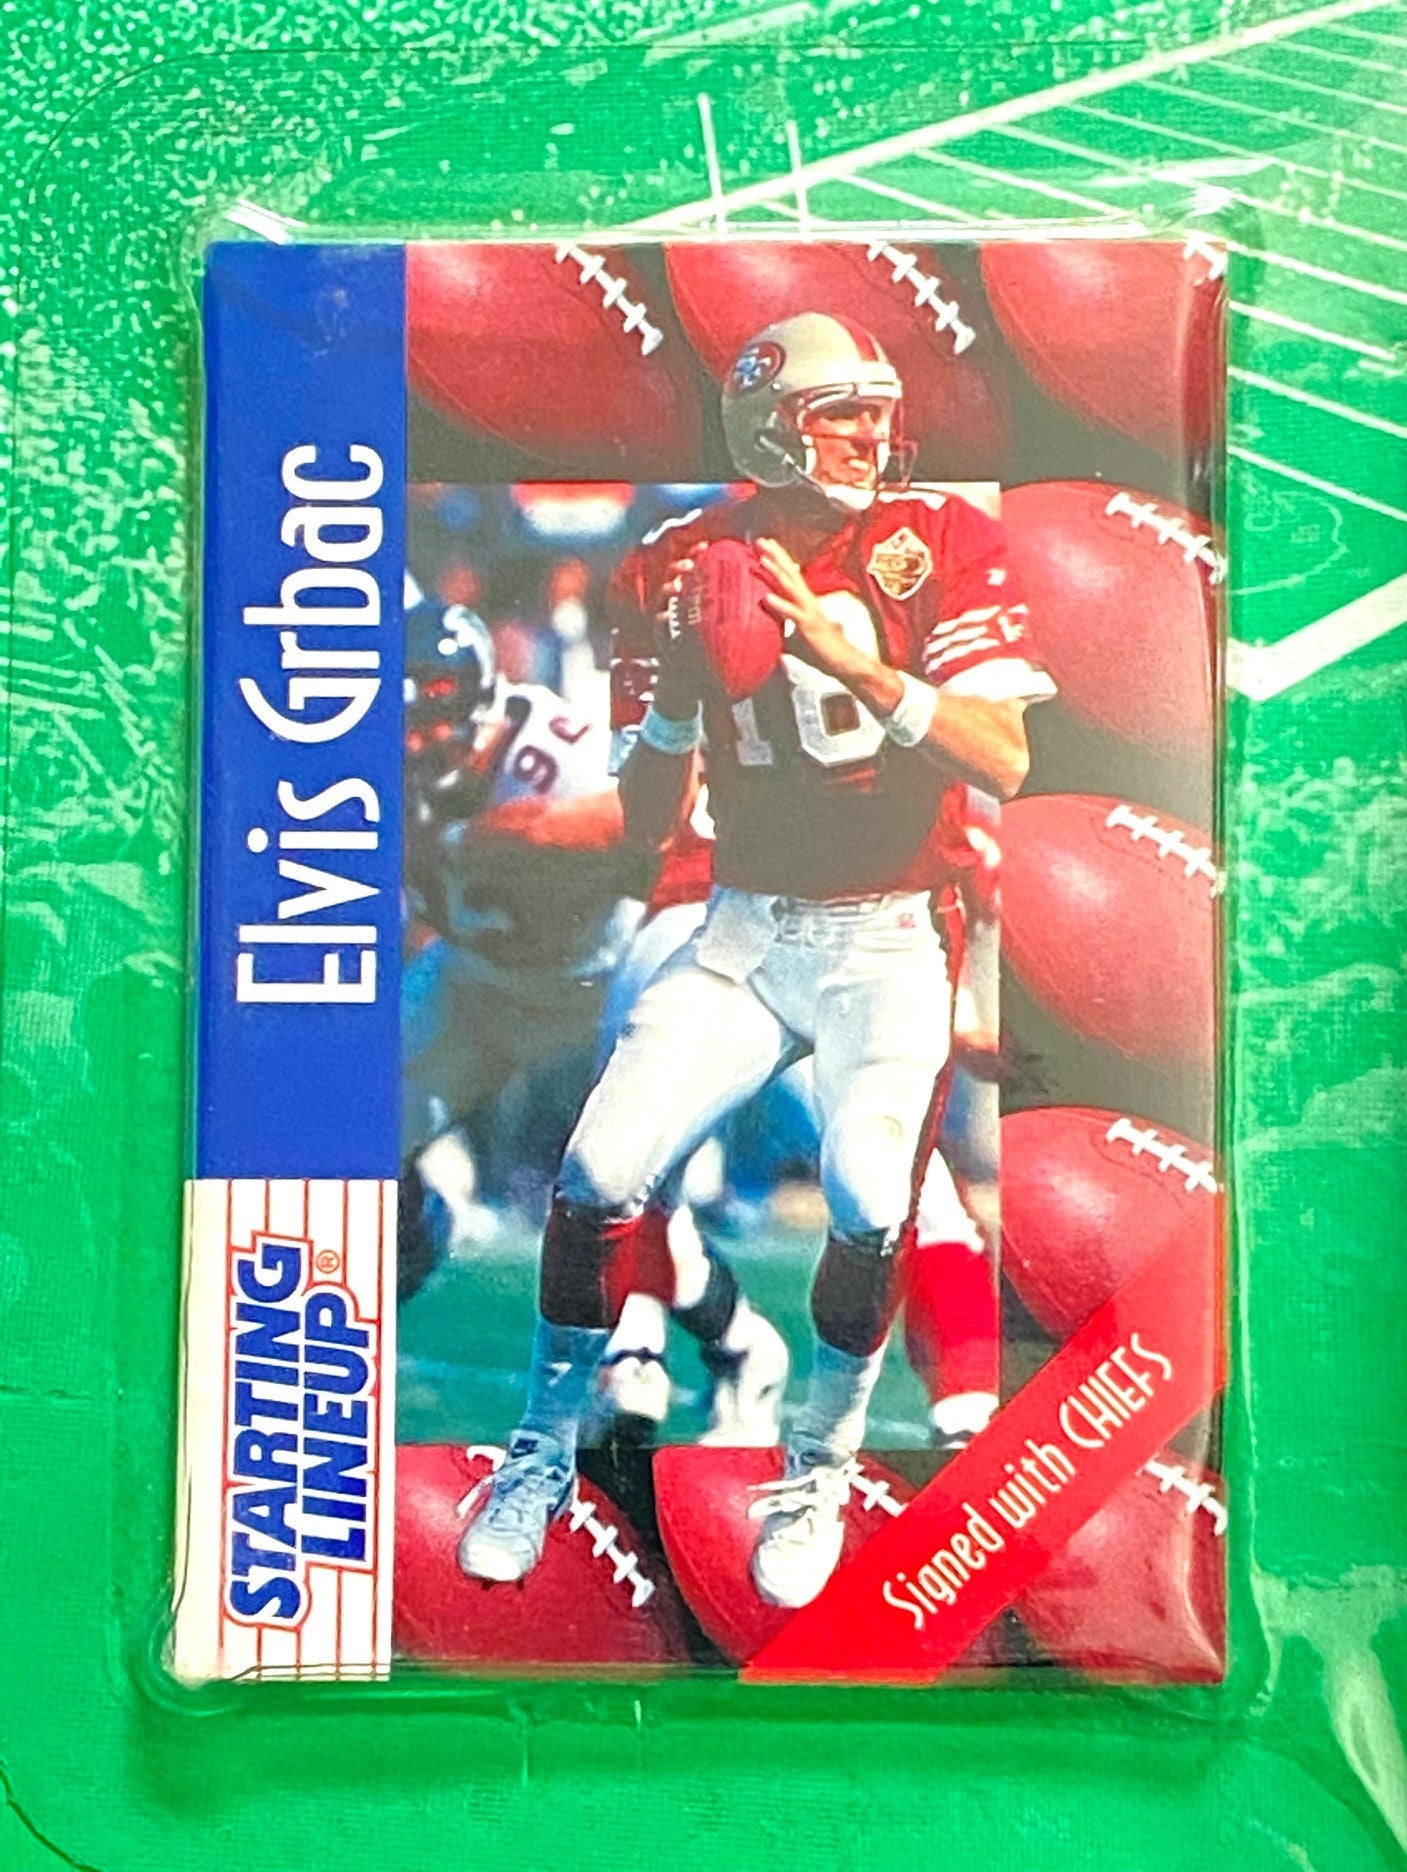 Elvis Grbac 1997 NFL KC Chiefs Starting Lineup Figurine NOS by Kenner